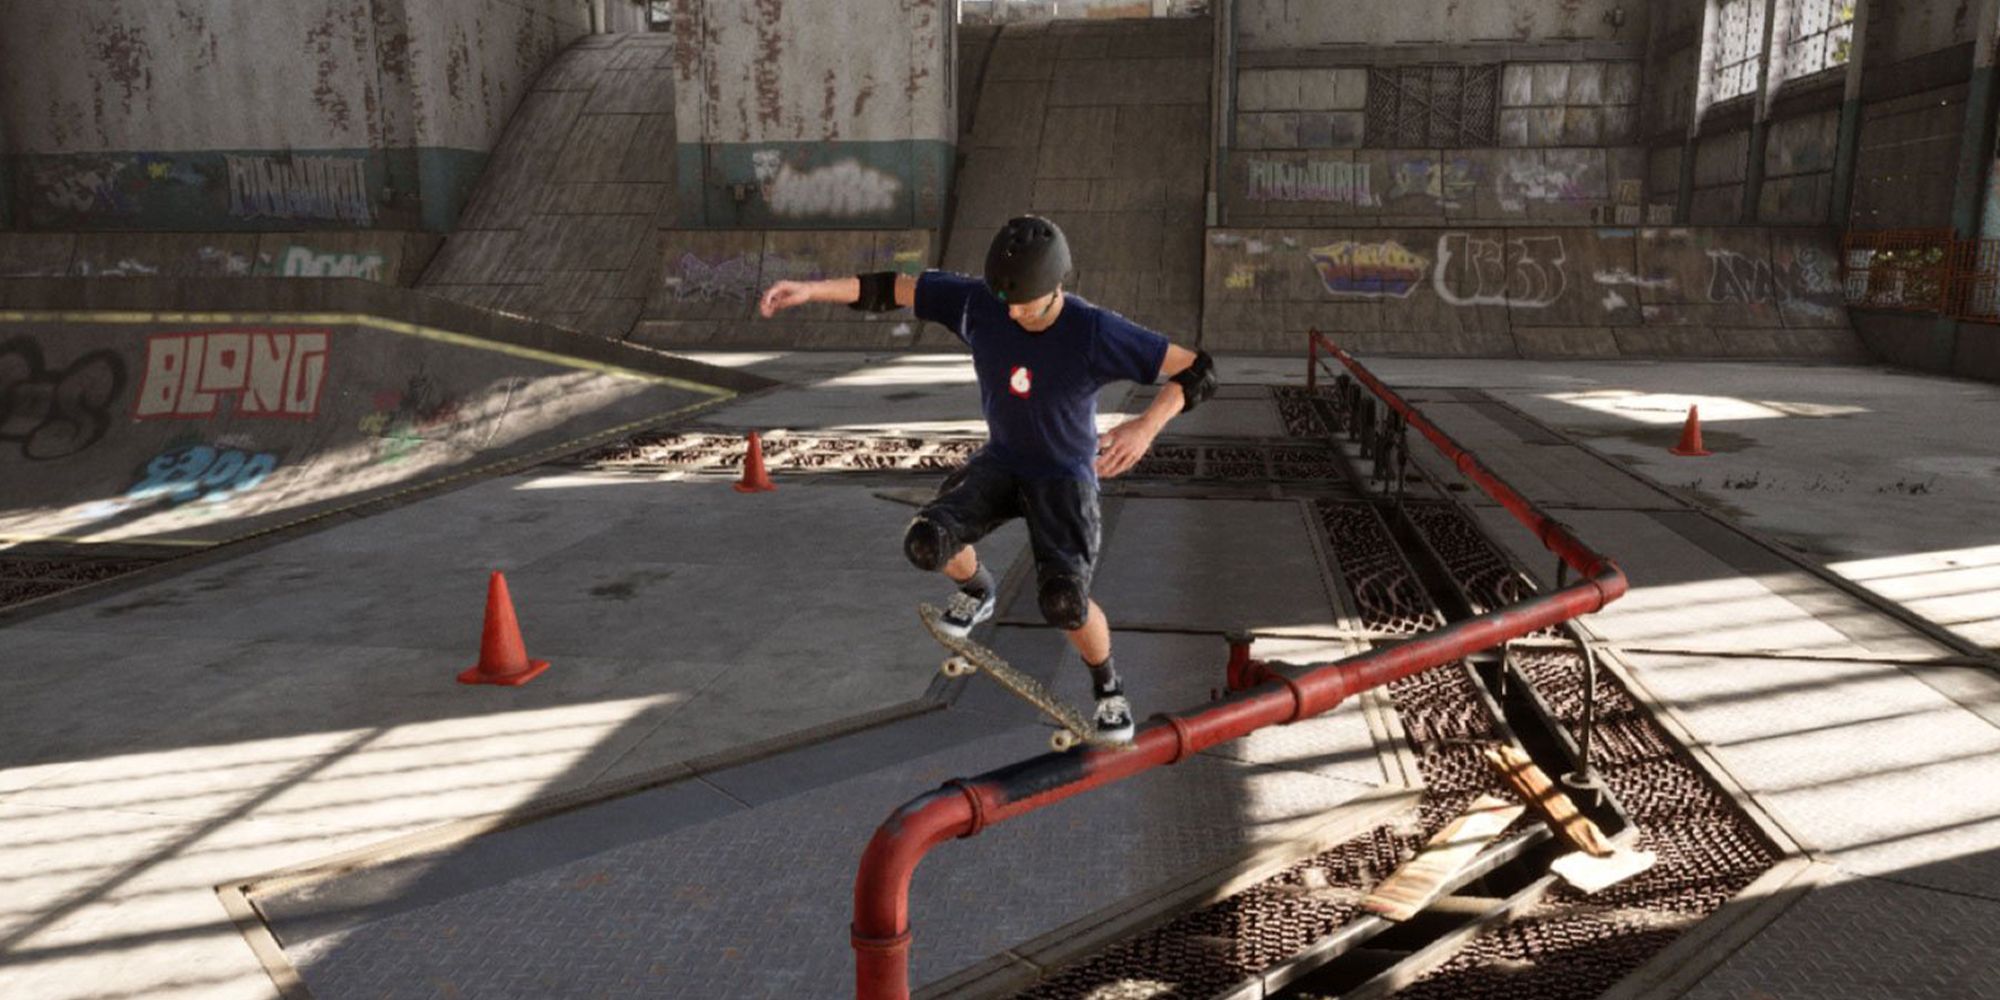 The skater grinds along a rail in Warehouse in Tony Hawk’s Pro Skater 1+2